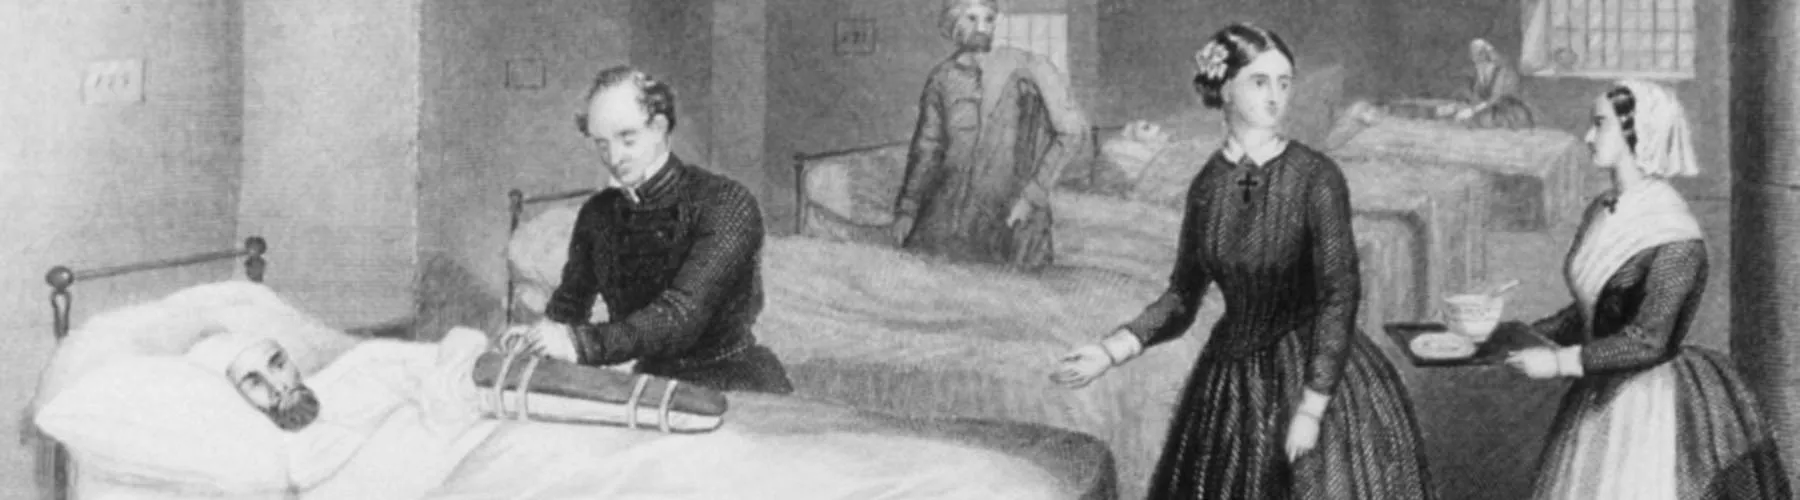 Illustration of Florence Nightingale and a doctor administering a patient